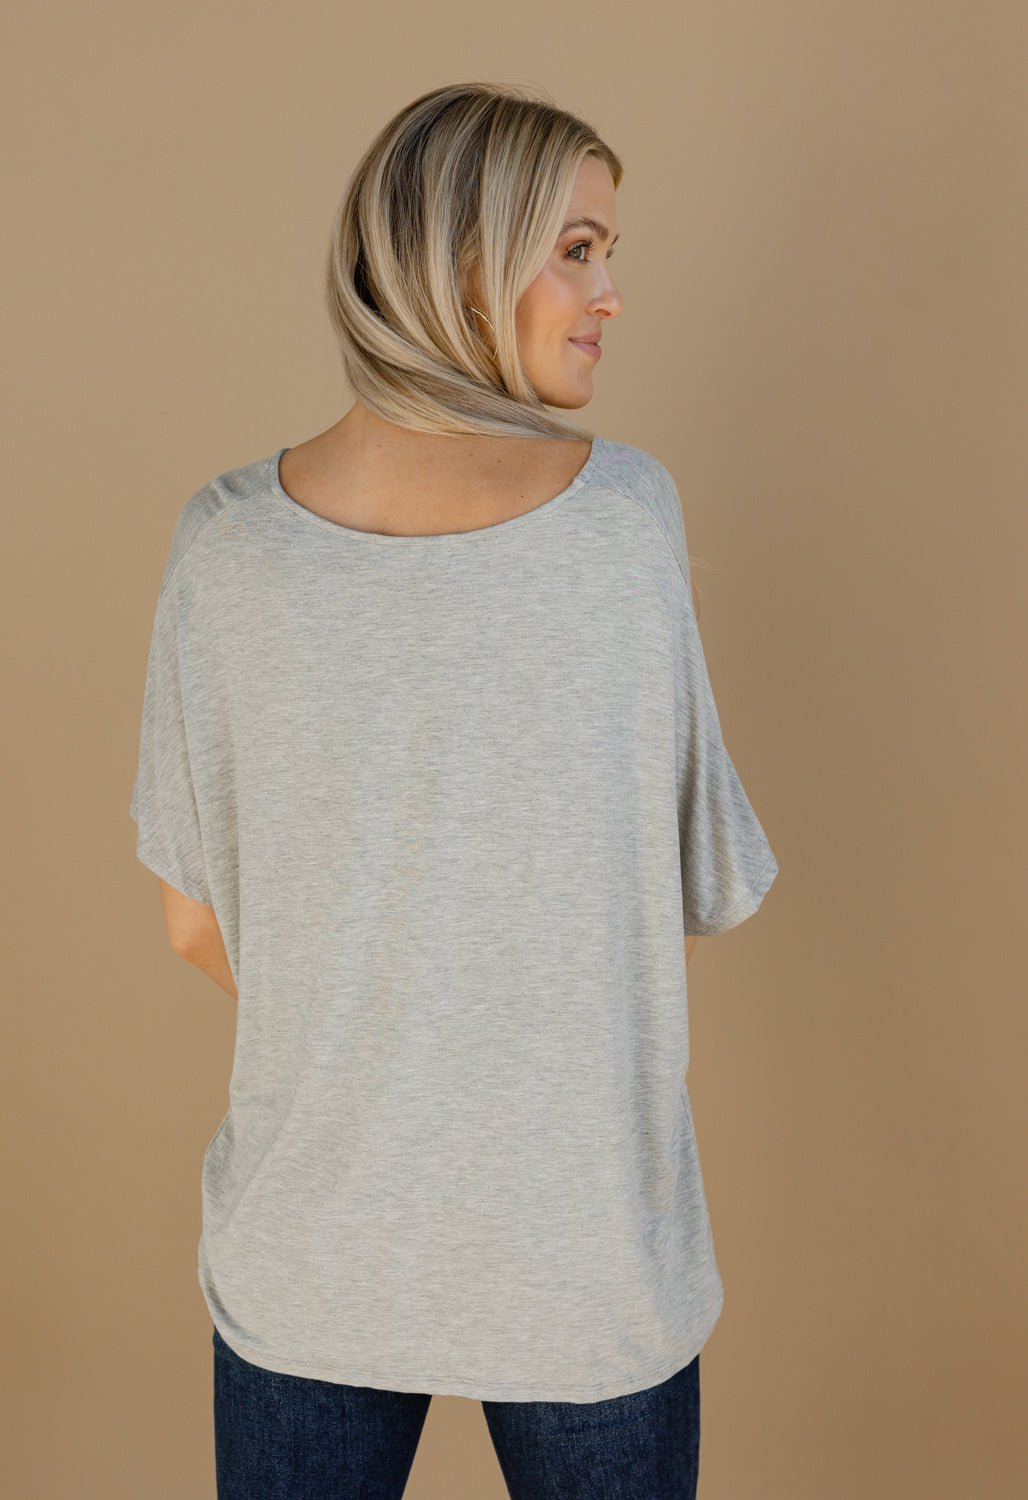 Short Sleeve V-Neck Knot Front Top - HEATHER GREY - willows clothing S/S Shirt